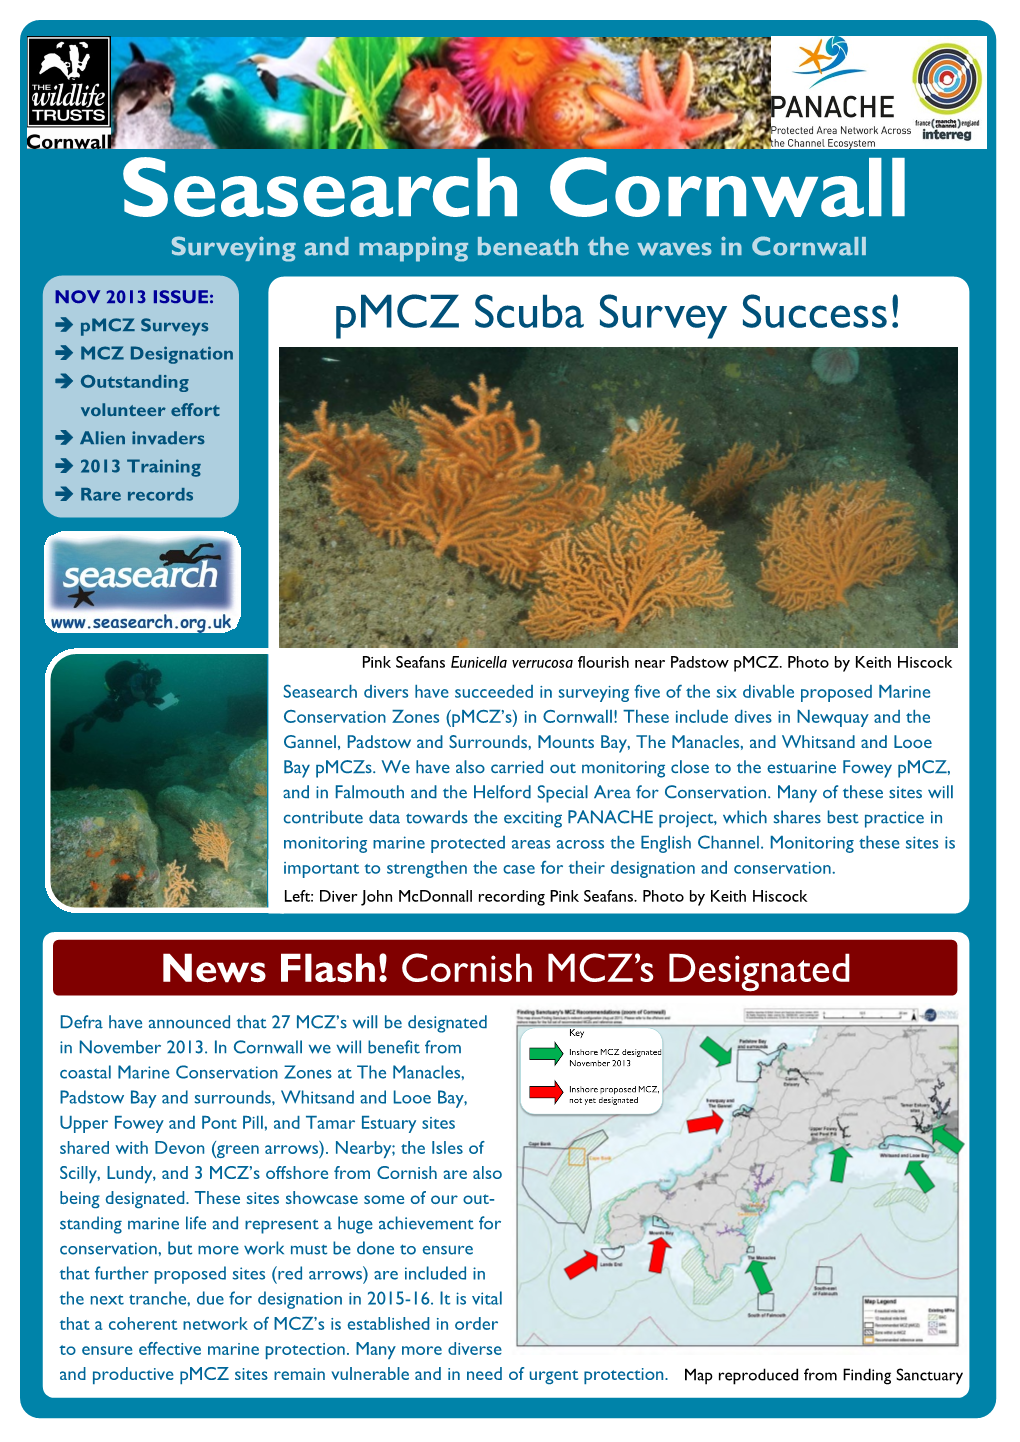 Seasearch Cornwall Surveying and Mapping Beneath the Waves in Cornwall